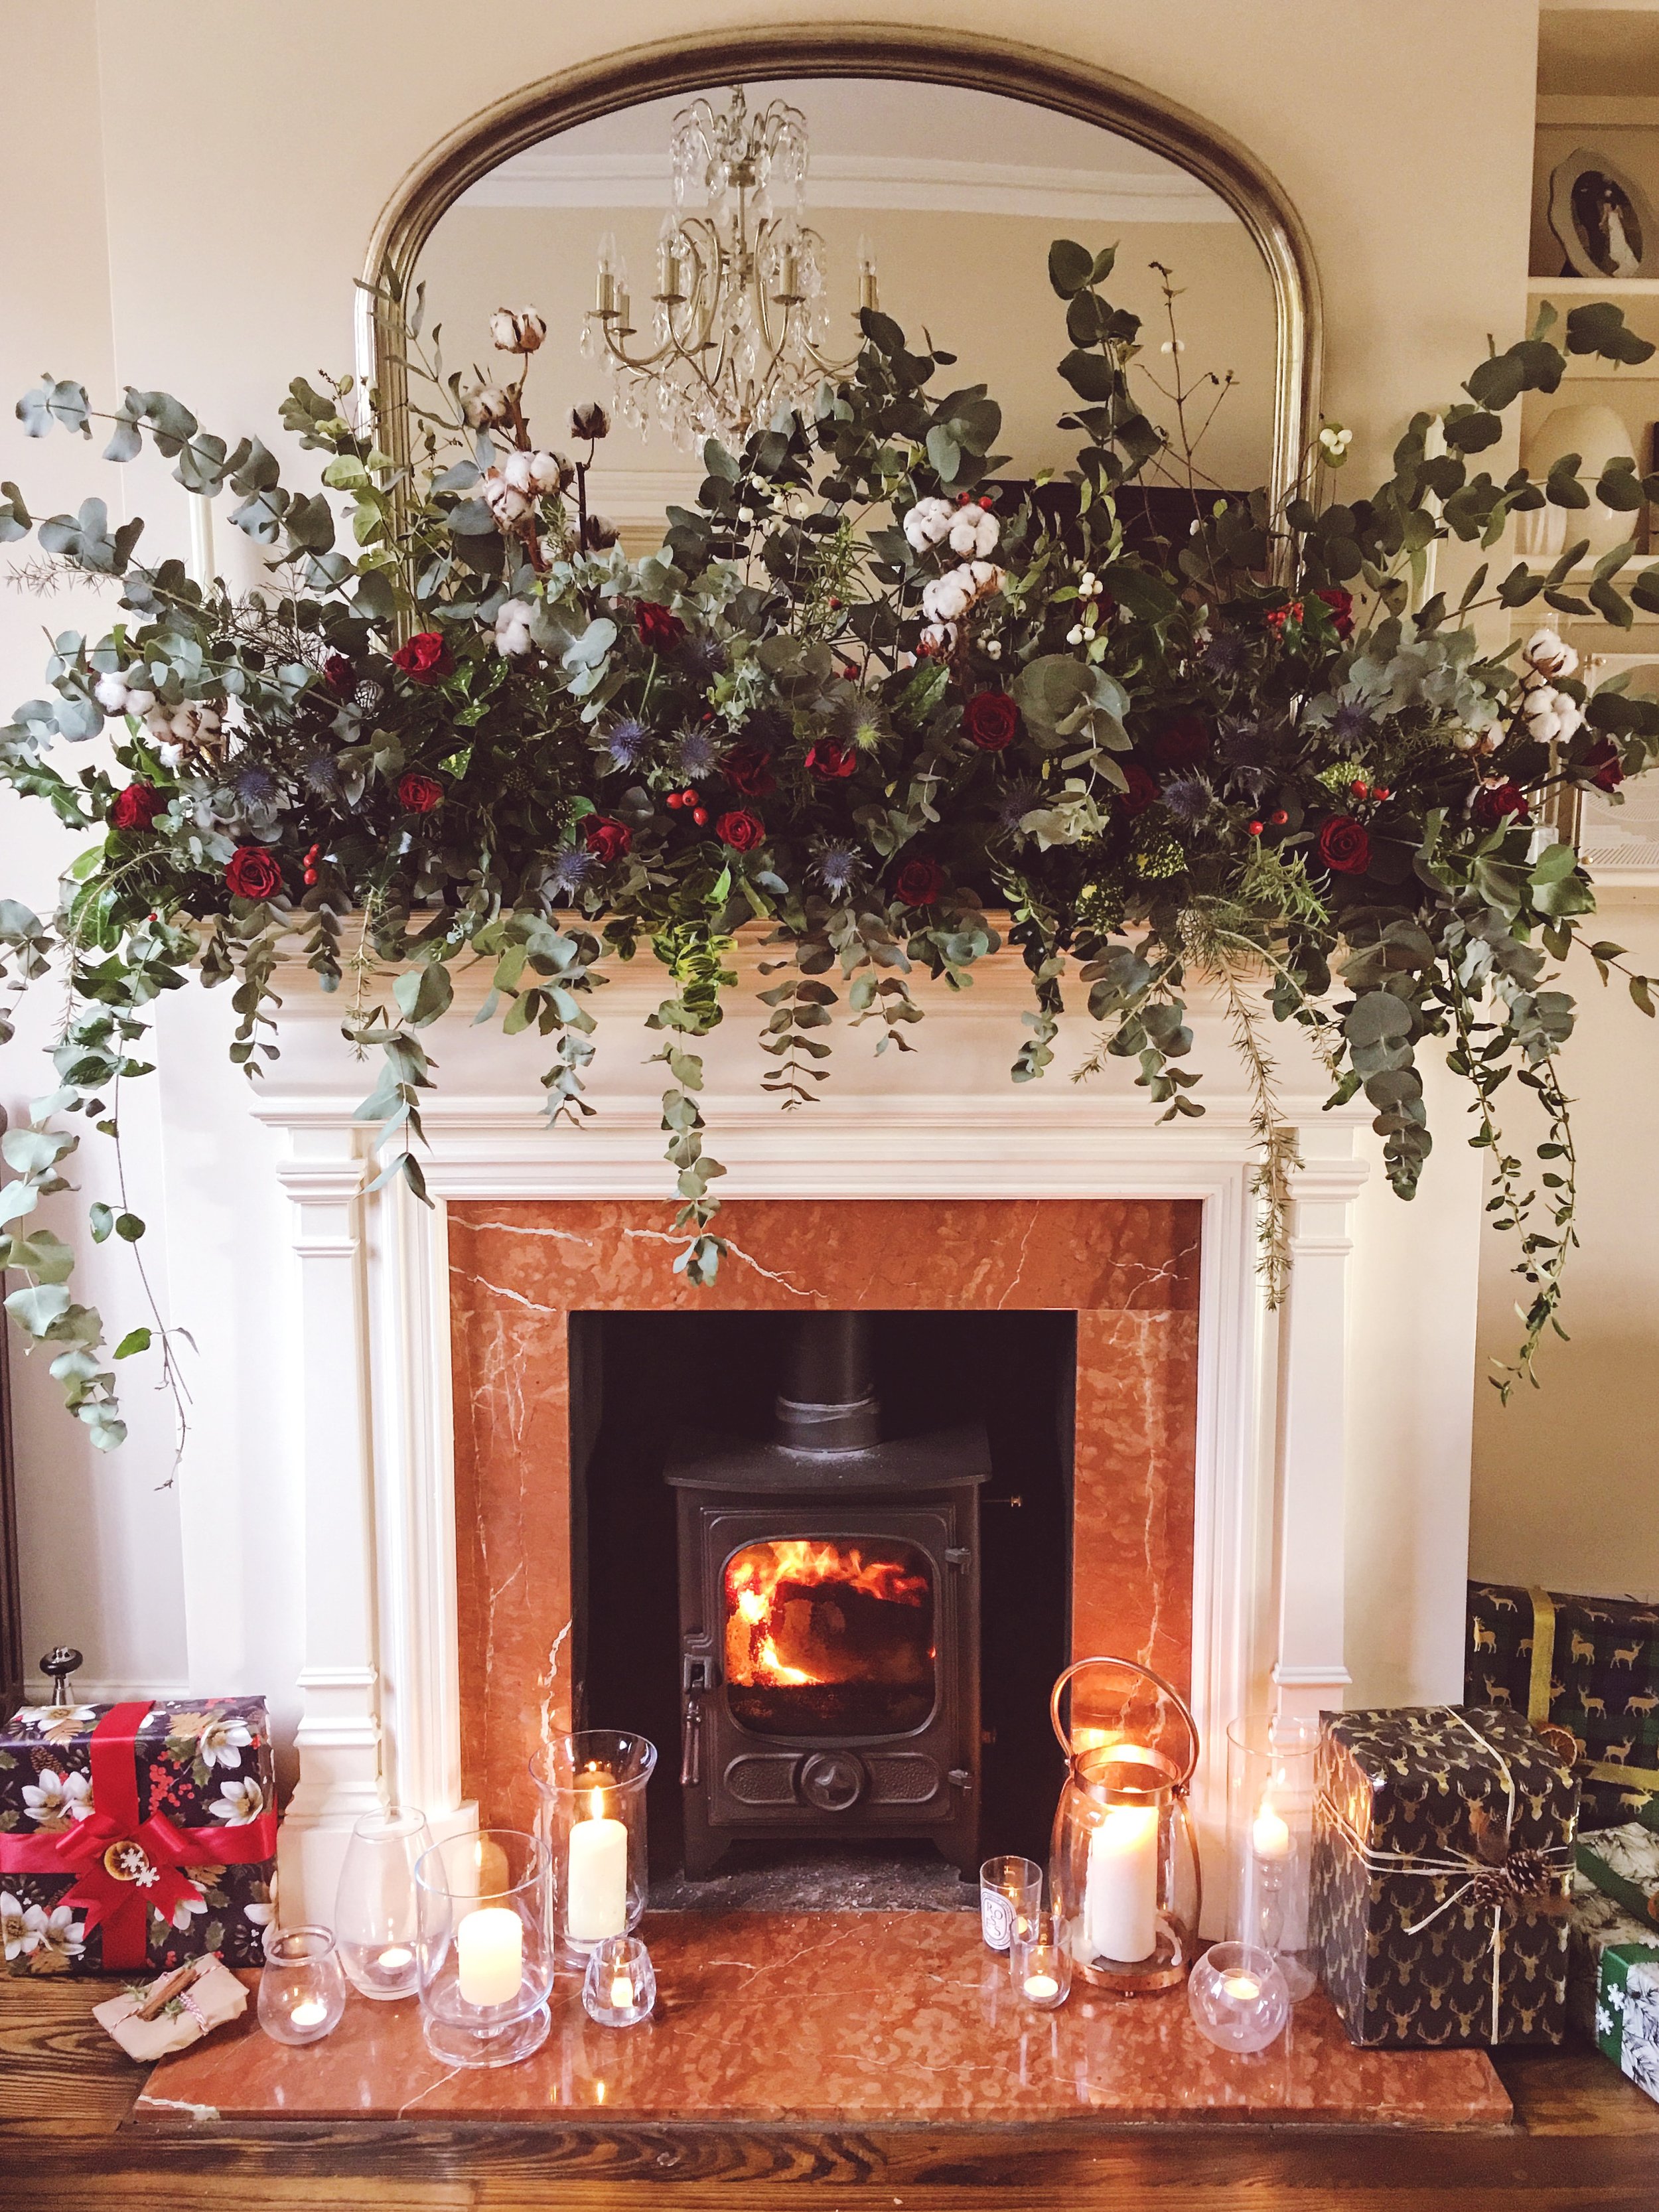 My Home At Christmas (+ How To Make This Fireplace Garland) — MELANIE